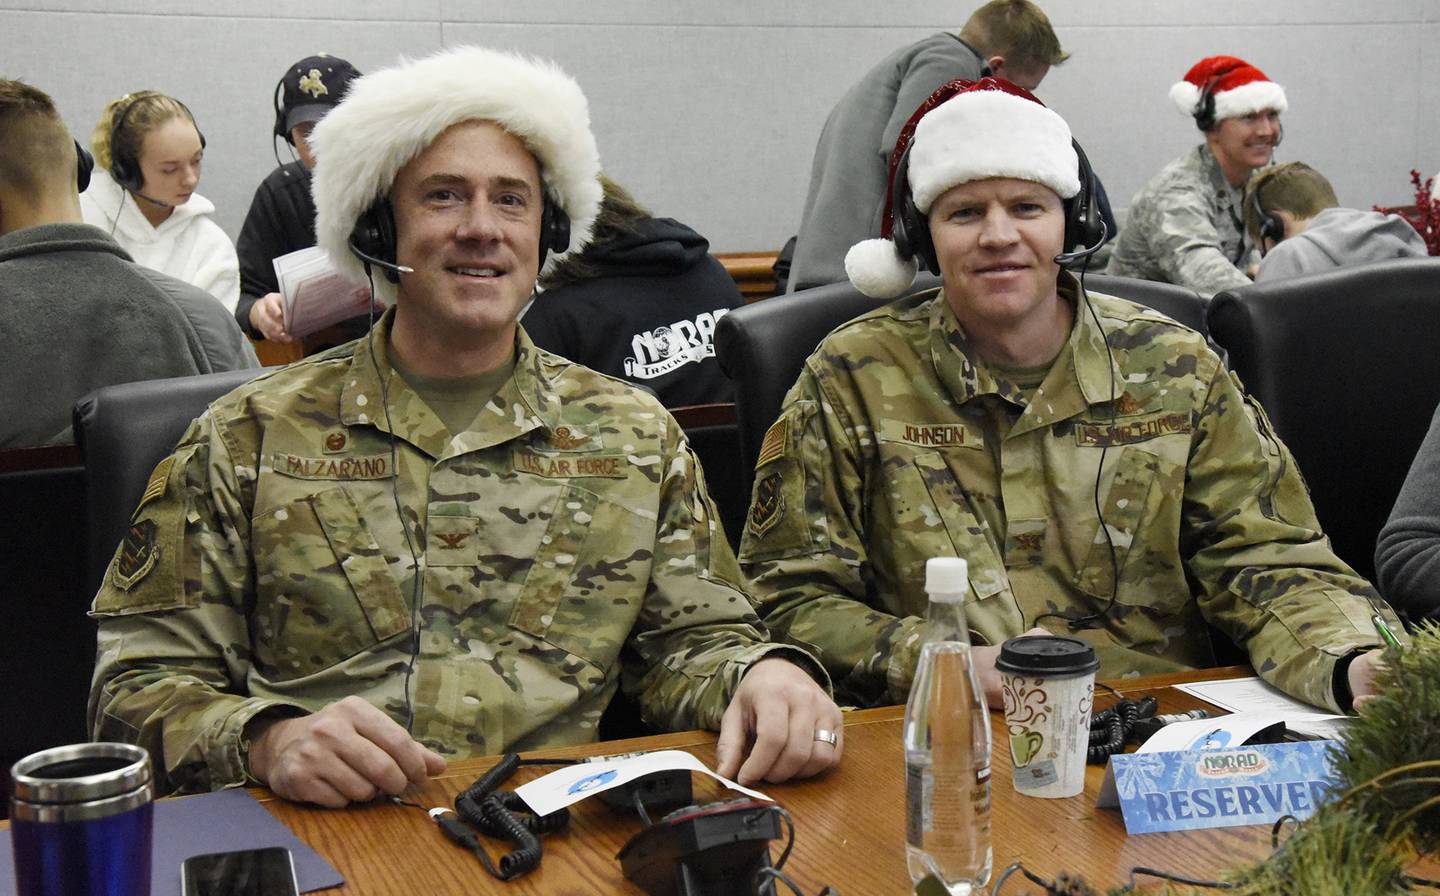 Col. Thomas Falzarano, 21st Space Wing commander, and Col. Sam Johnson, 21st SW vice commander, volunteer as official NORAD Santa Trackers at the 2019 NORAD Tracks Santa Operation Center on Peterson Air Force Base, Colo., on Dec. 24, 2019.